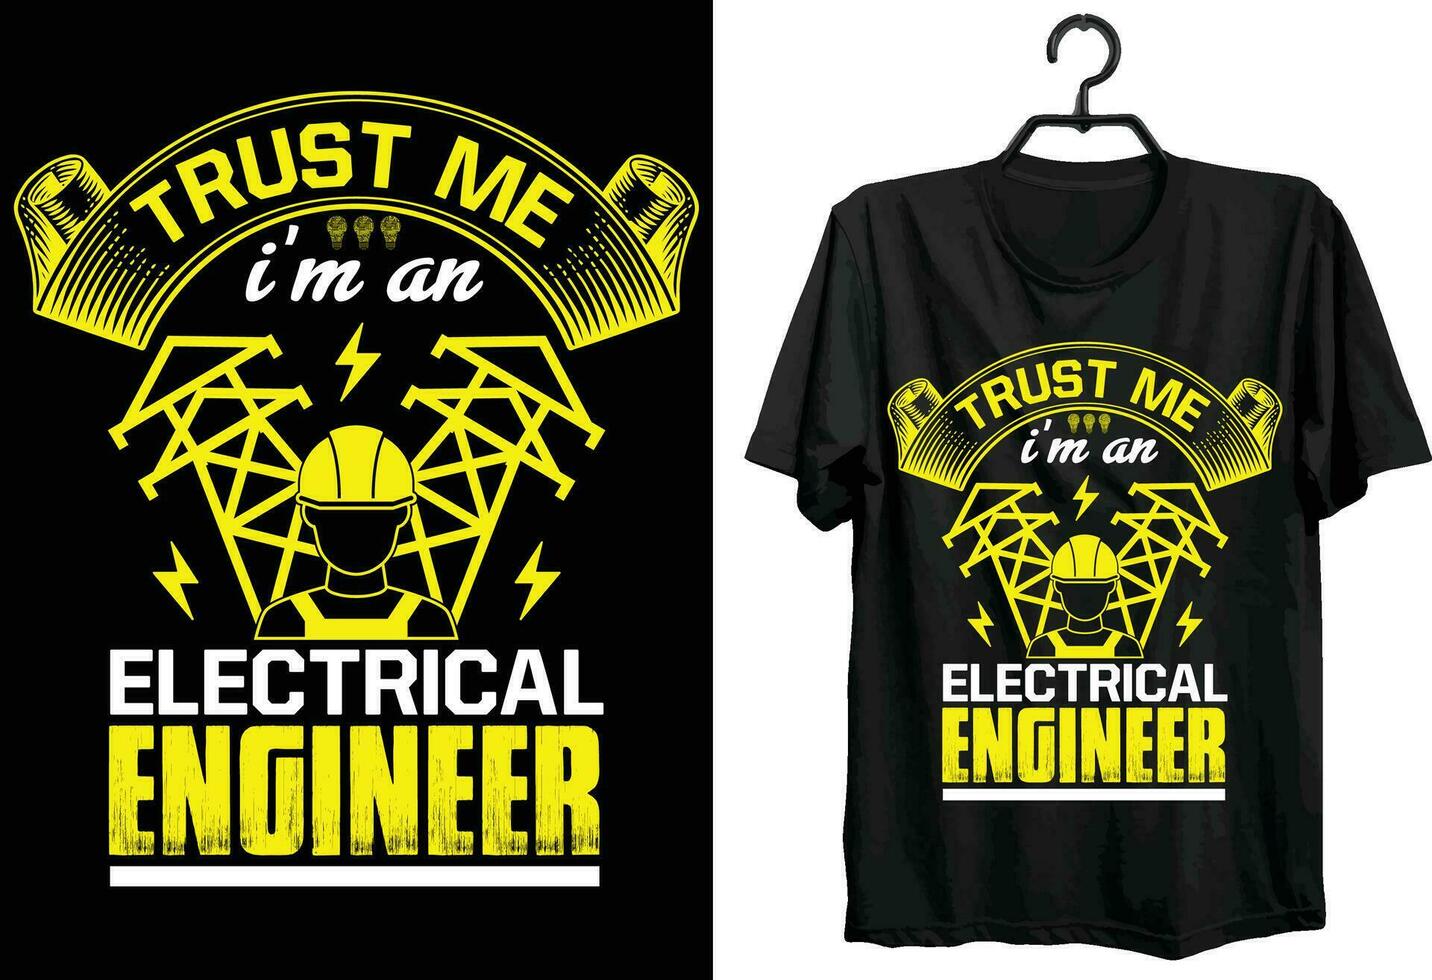 Trust Me I'm An Electrical Engineer. Electrical Engineer T shirt Design. Funny Gift Item Electrical Engineer T shirt Design For Electrician. vector